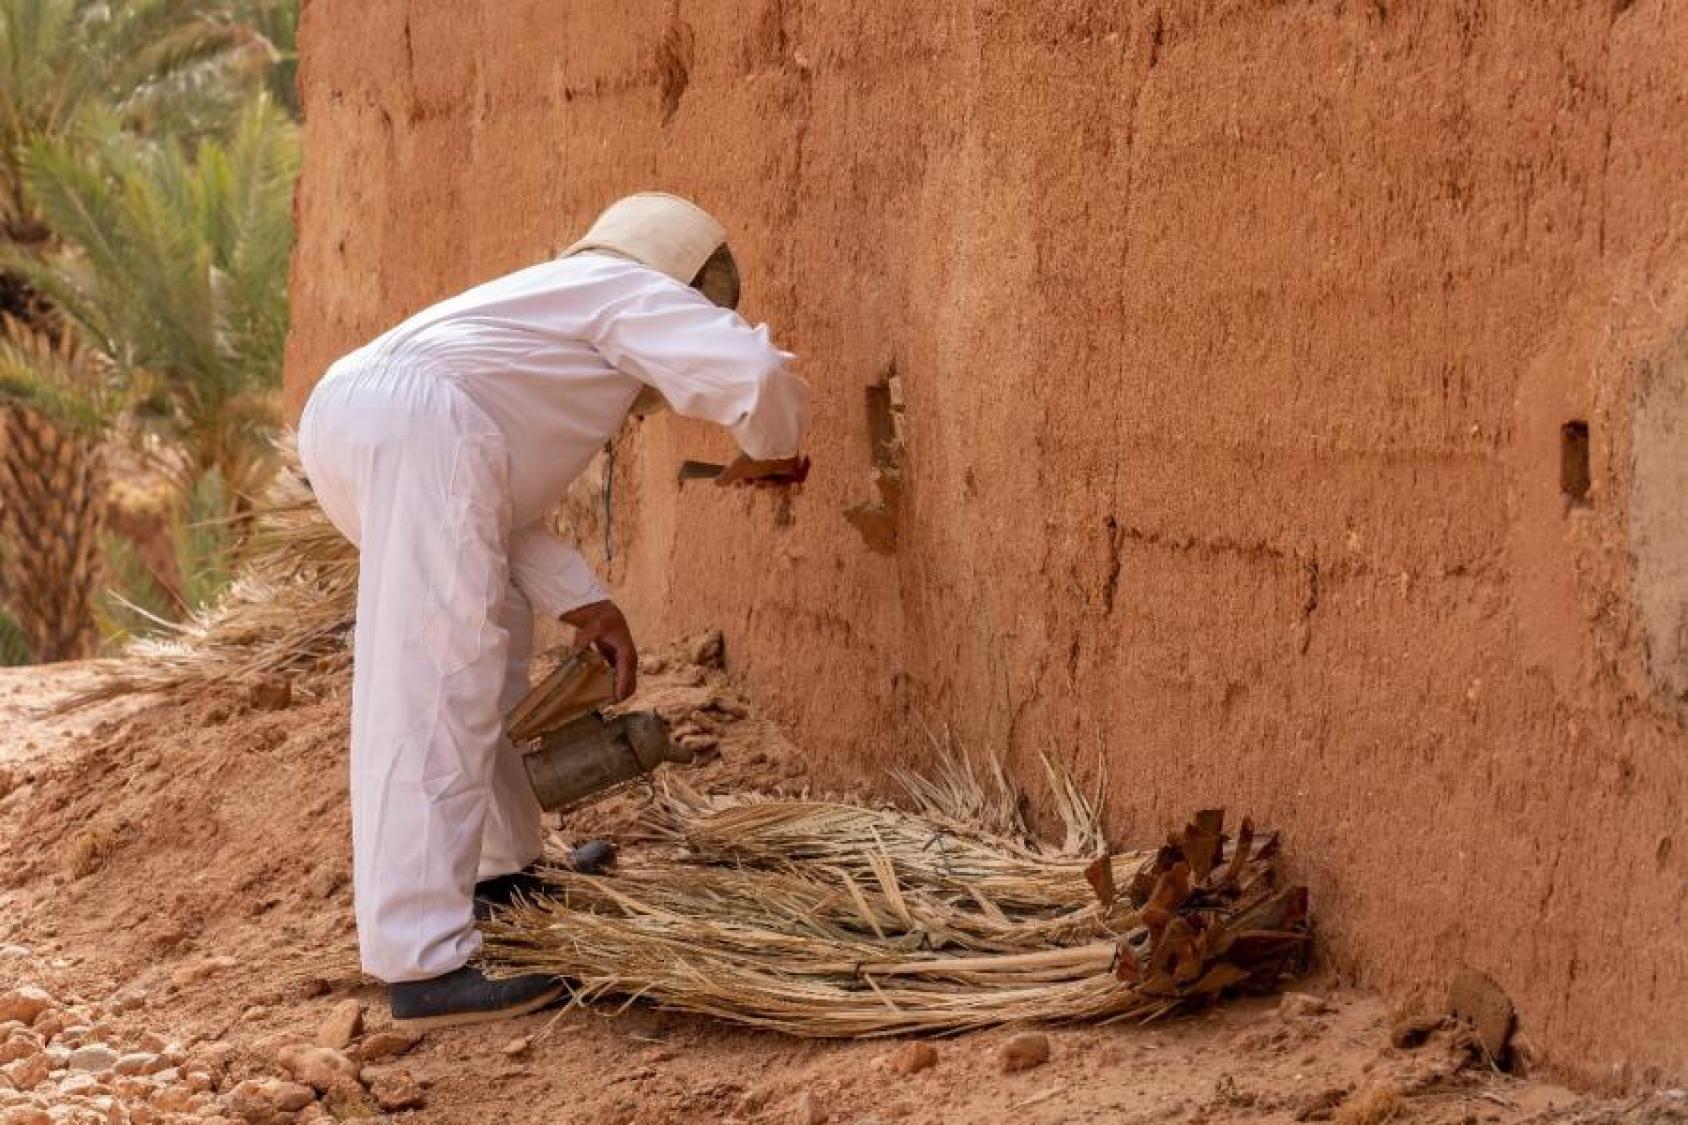 A person in white linen clothing stands against a light brick colored wall, hovering over dried palm branches and reaching into a space in the wall.